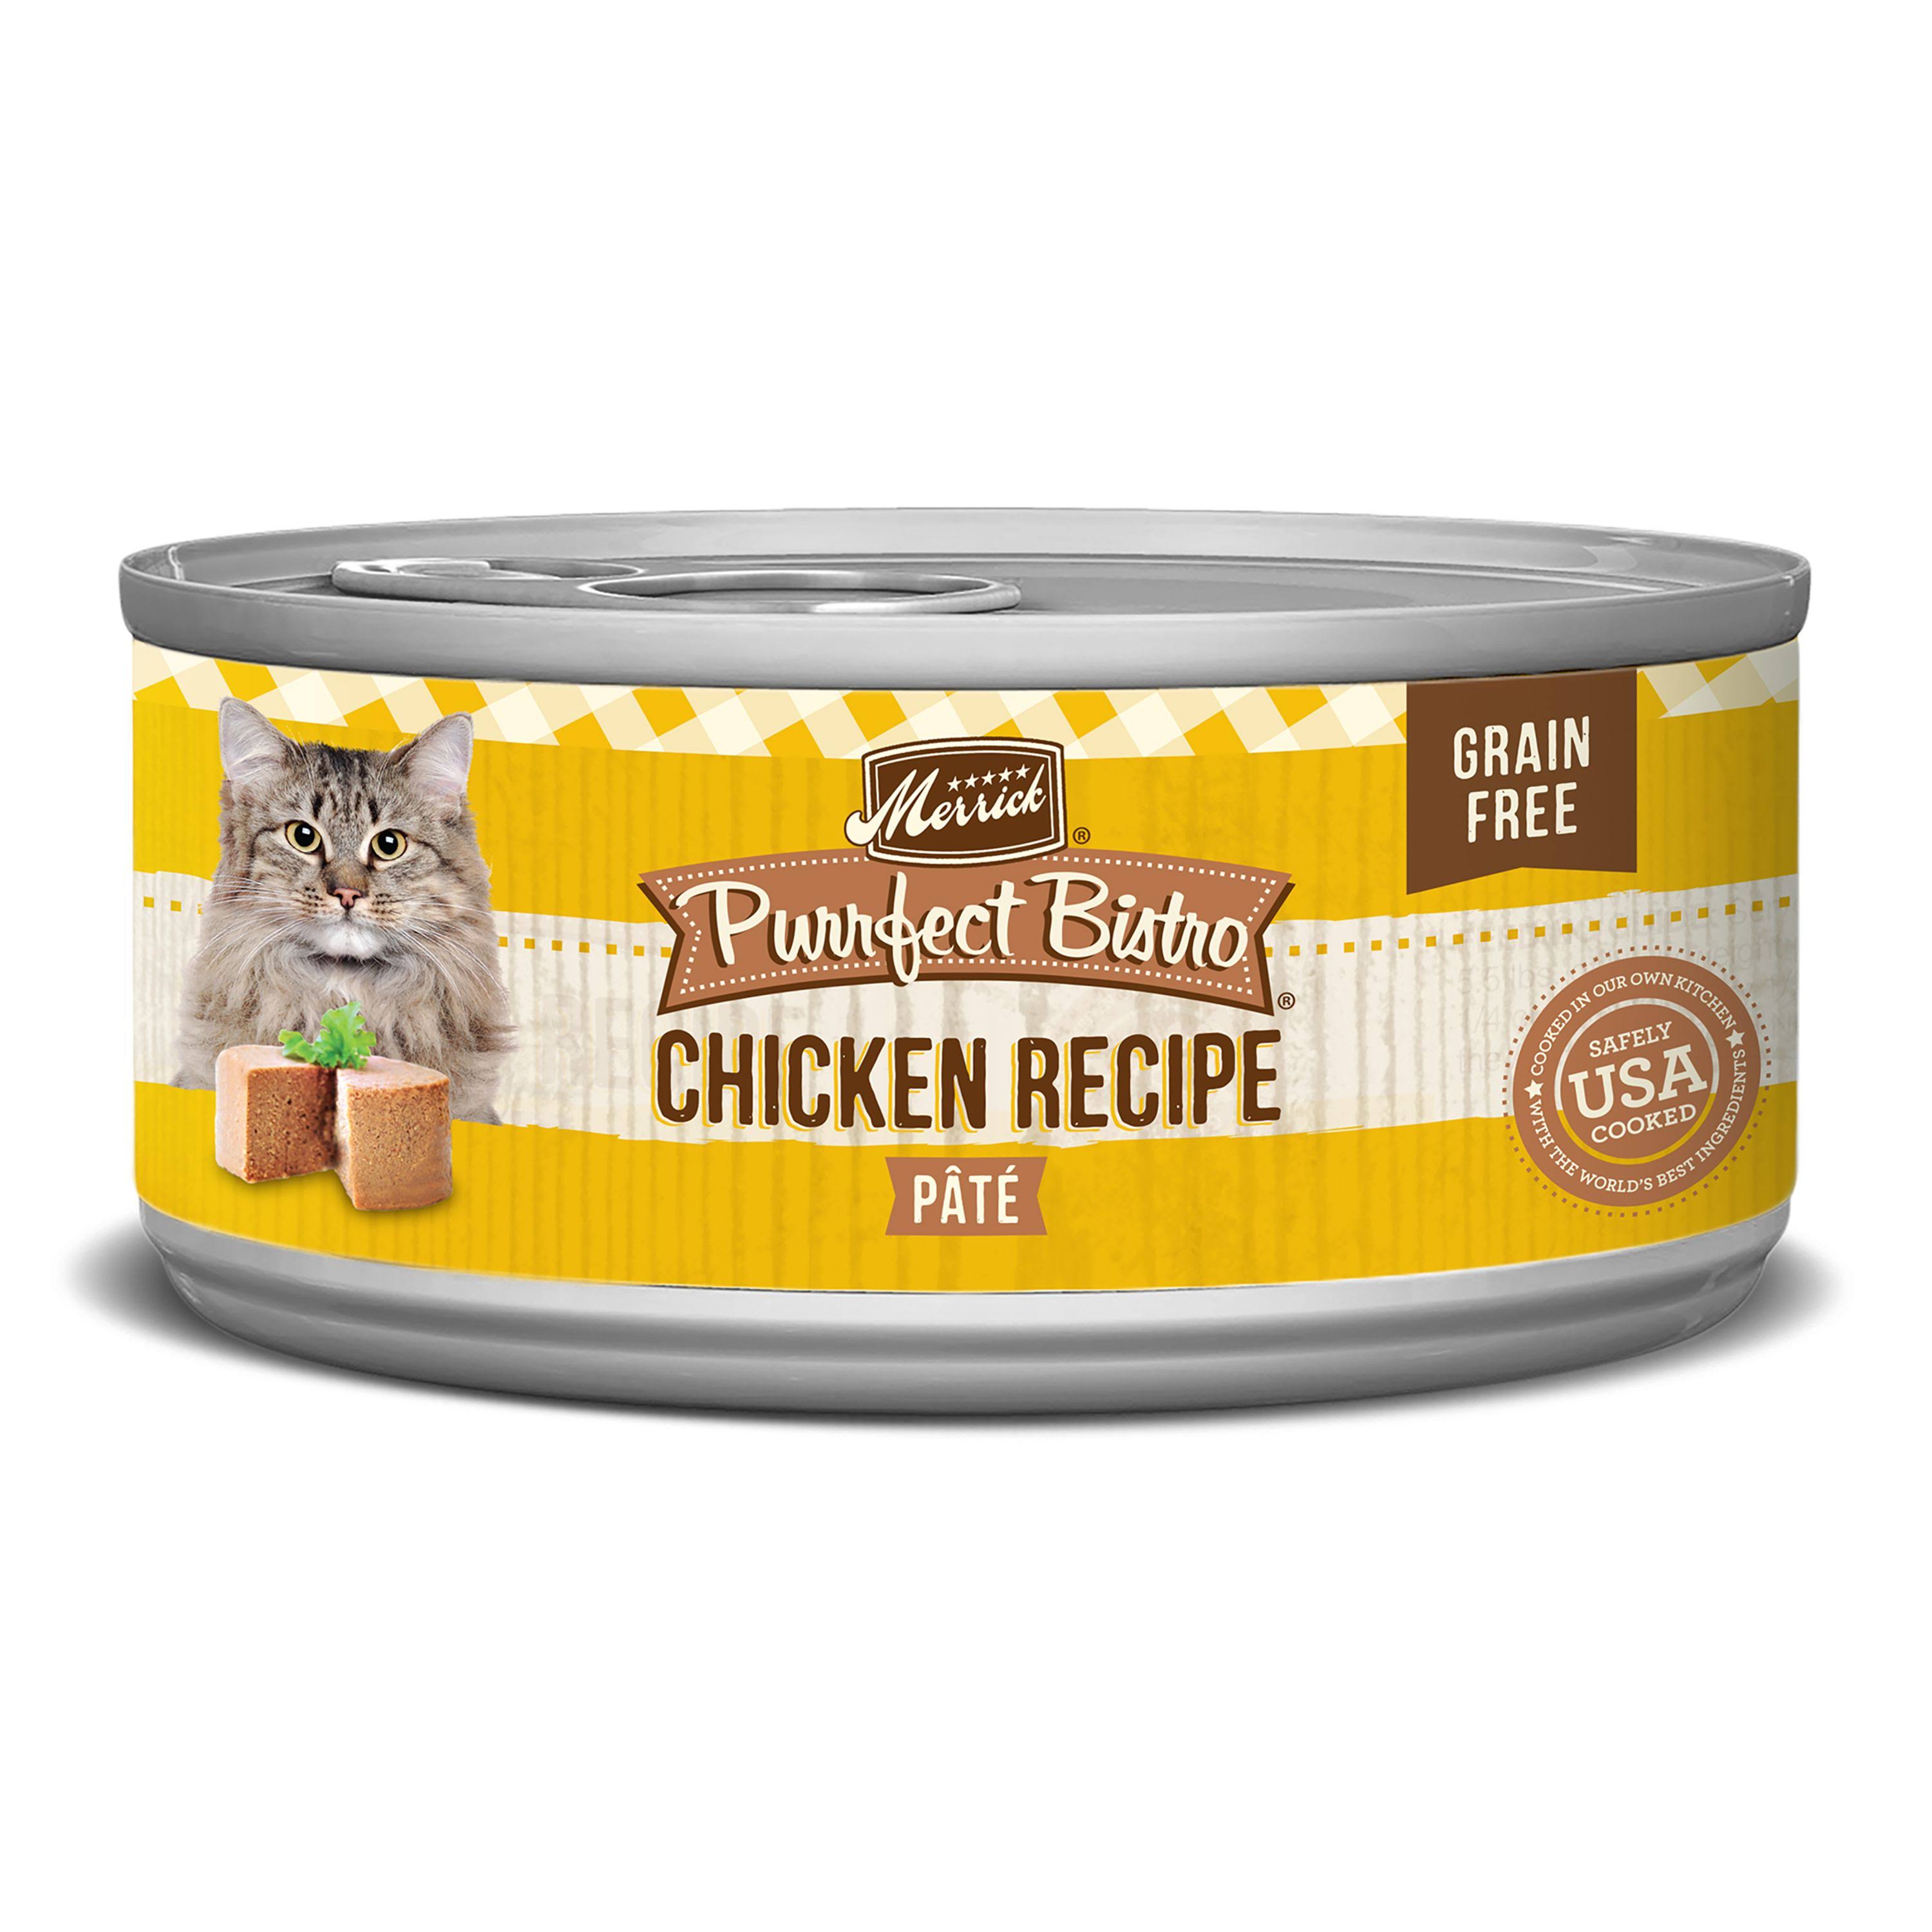 Merrick Purrfect Bistro Canned Cat Food - Grain Free, Chicken Pate, 5.5oz